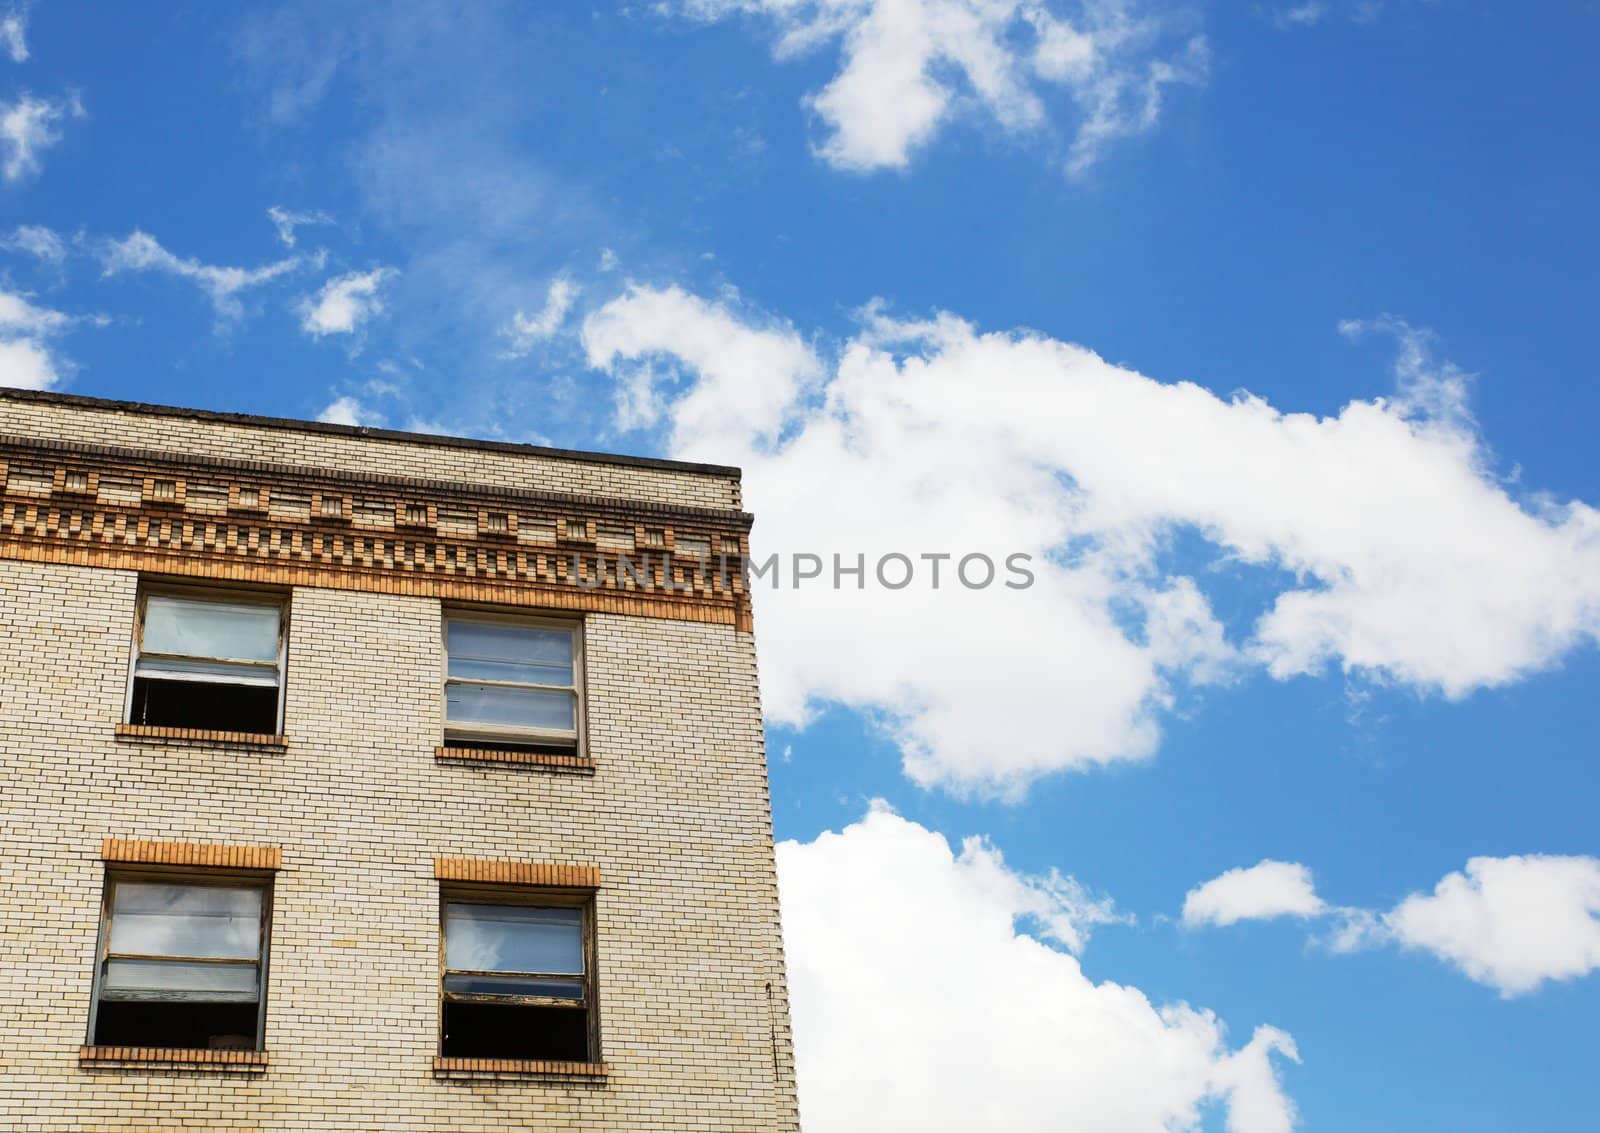 Old Brick Building and Sky by bobkeenan